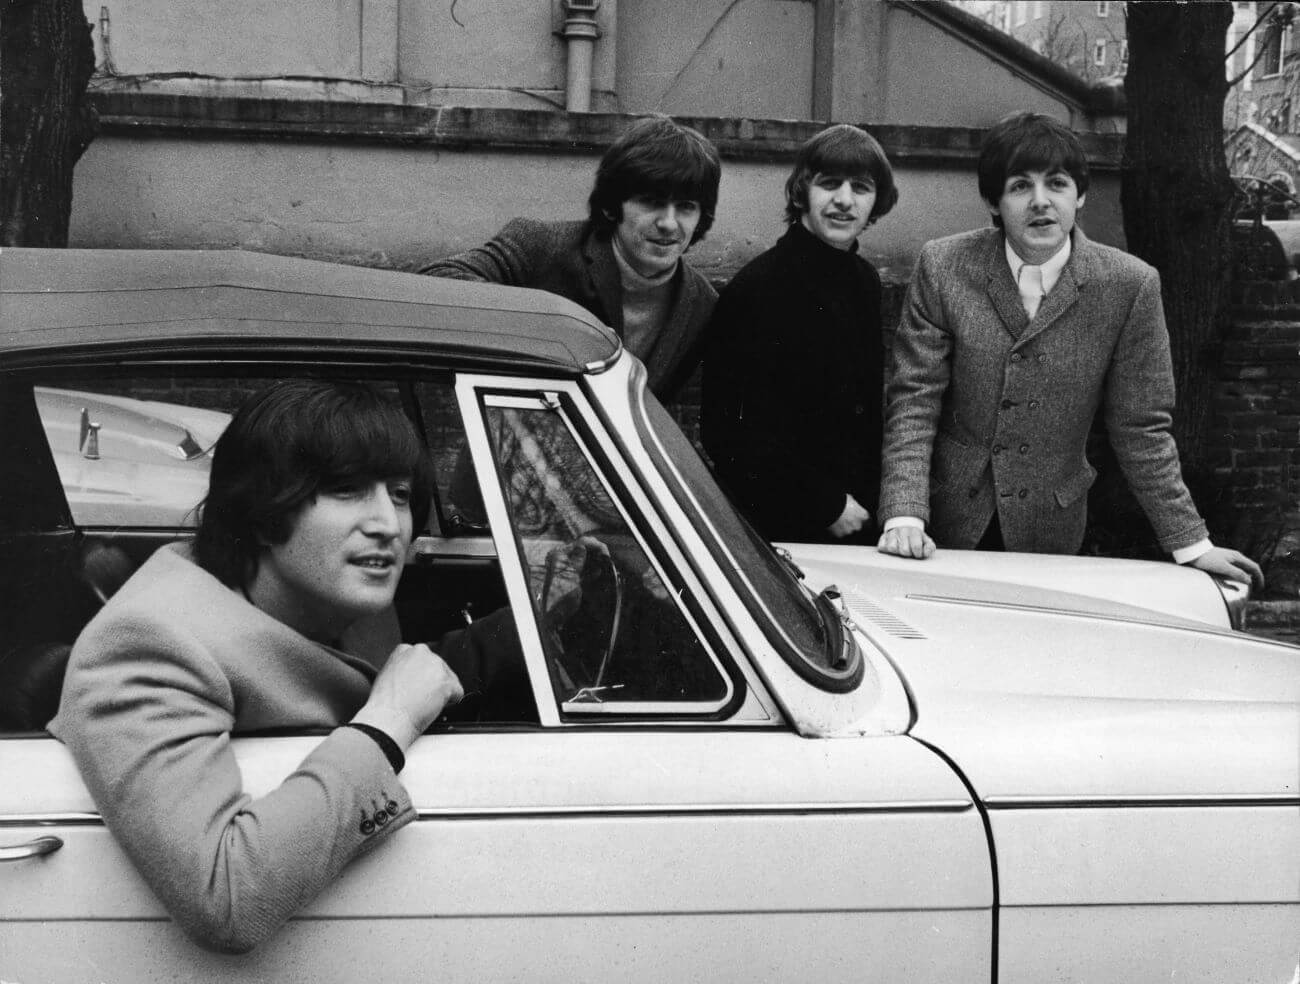 A black and white picture of John Lennon sitting in a car. George Harrison, Ringo Starr, and Paul McCartney stand on the opposite side of the car.